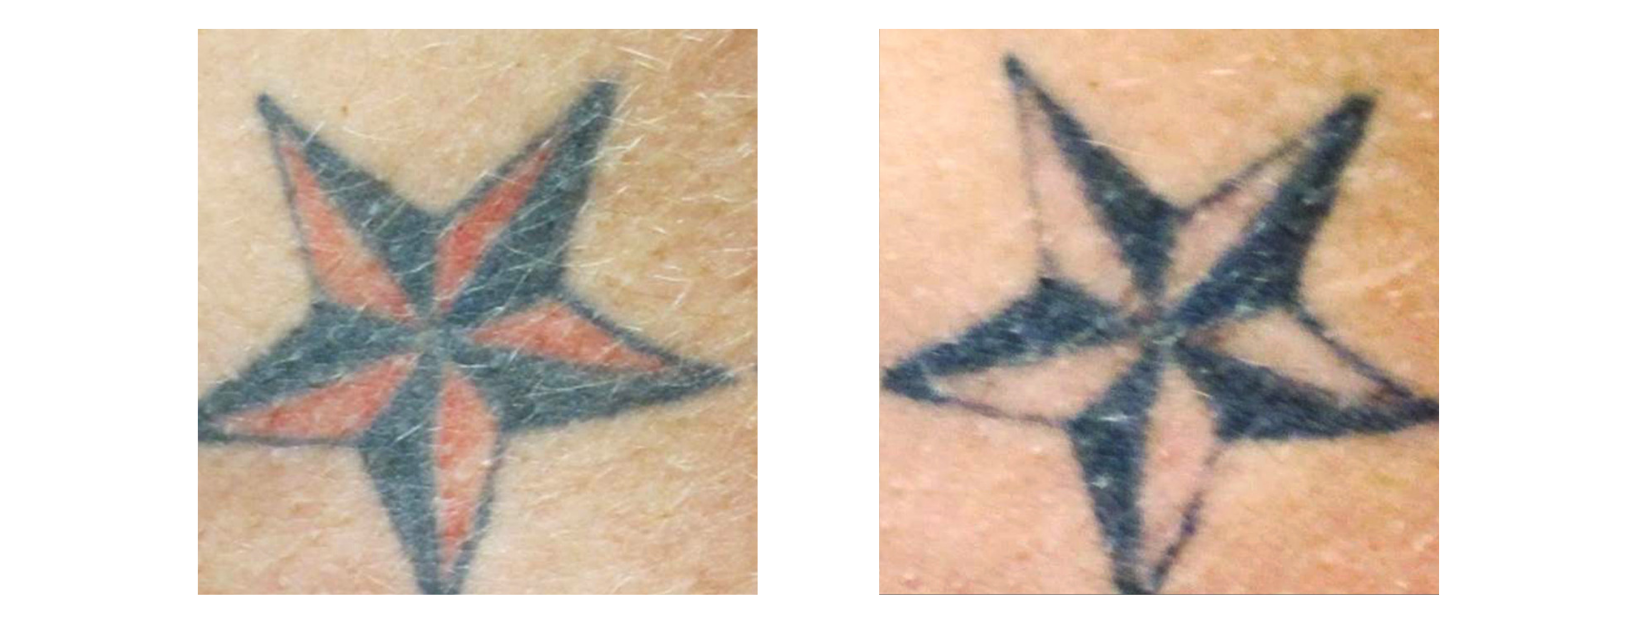 Tattoo Removal Red Tone from inner section